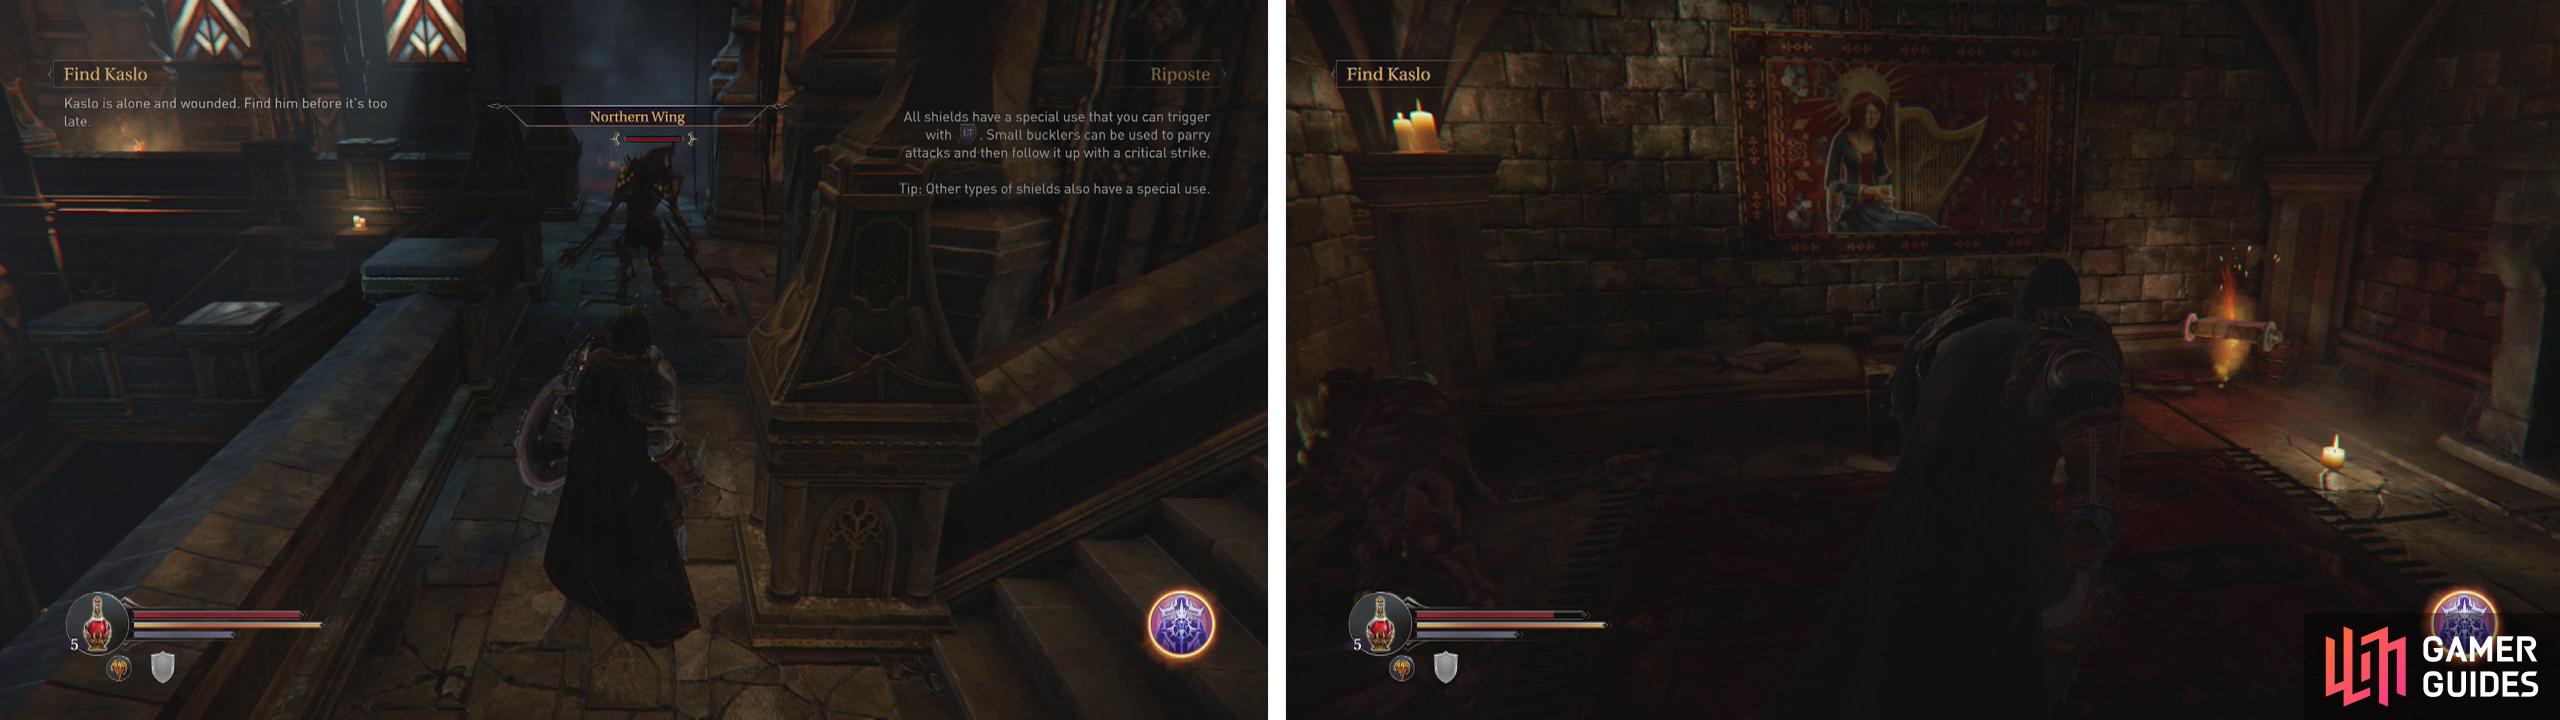 Enter the stairwell and practice your backstab (left). Enter the doors halfway down the stairs to find a pair of Infected and an Audio Note (right).